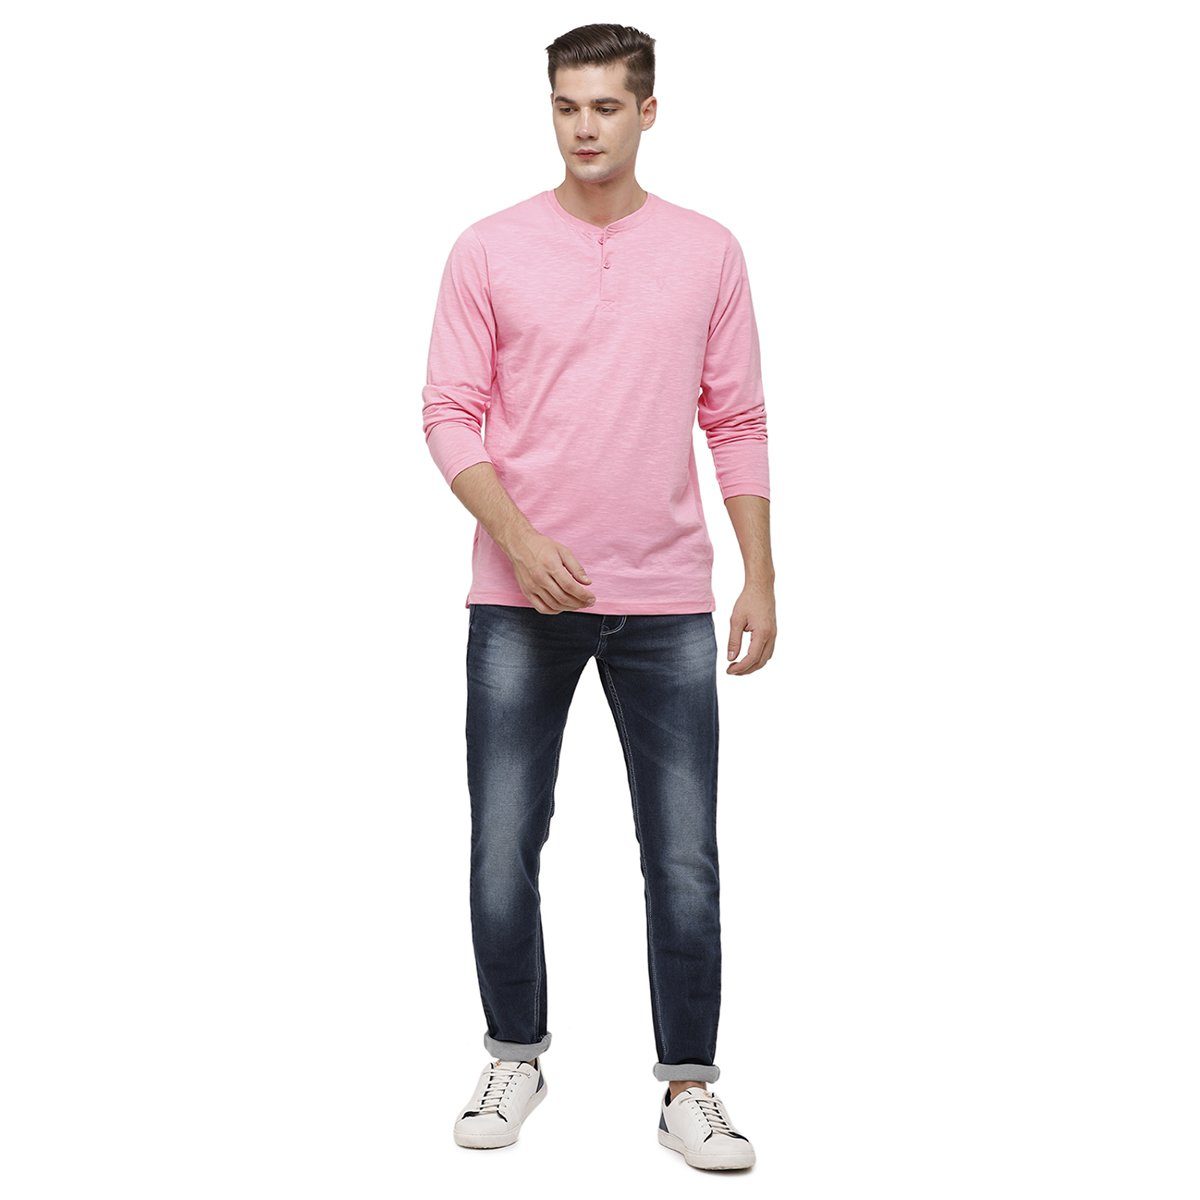 Classic polo Men's Pink Full Sleeve Slim Fit Henley Crew T-Shirt - Ozel - Begonia Pink T-shirt Classic Polo 